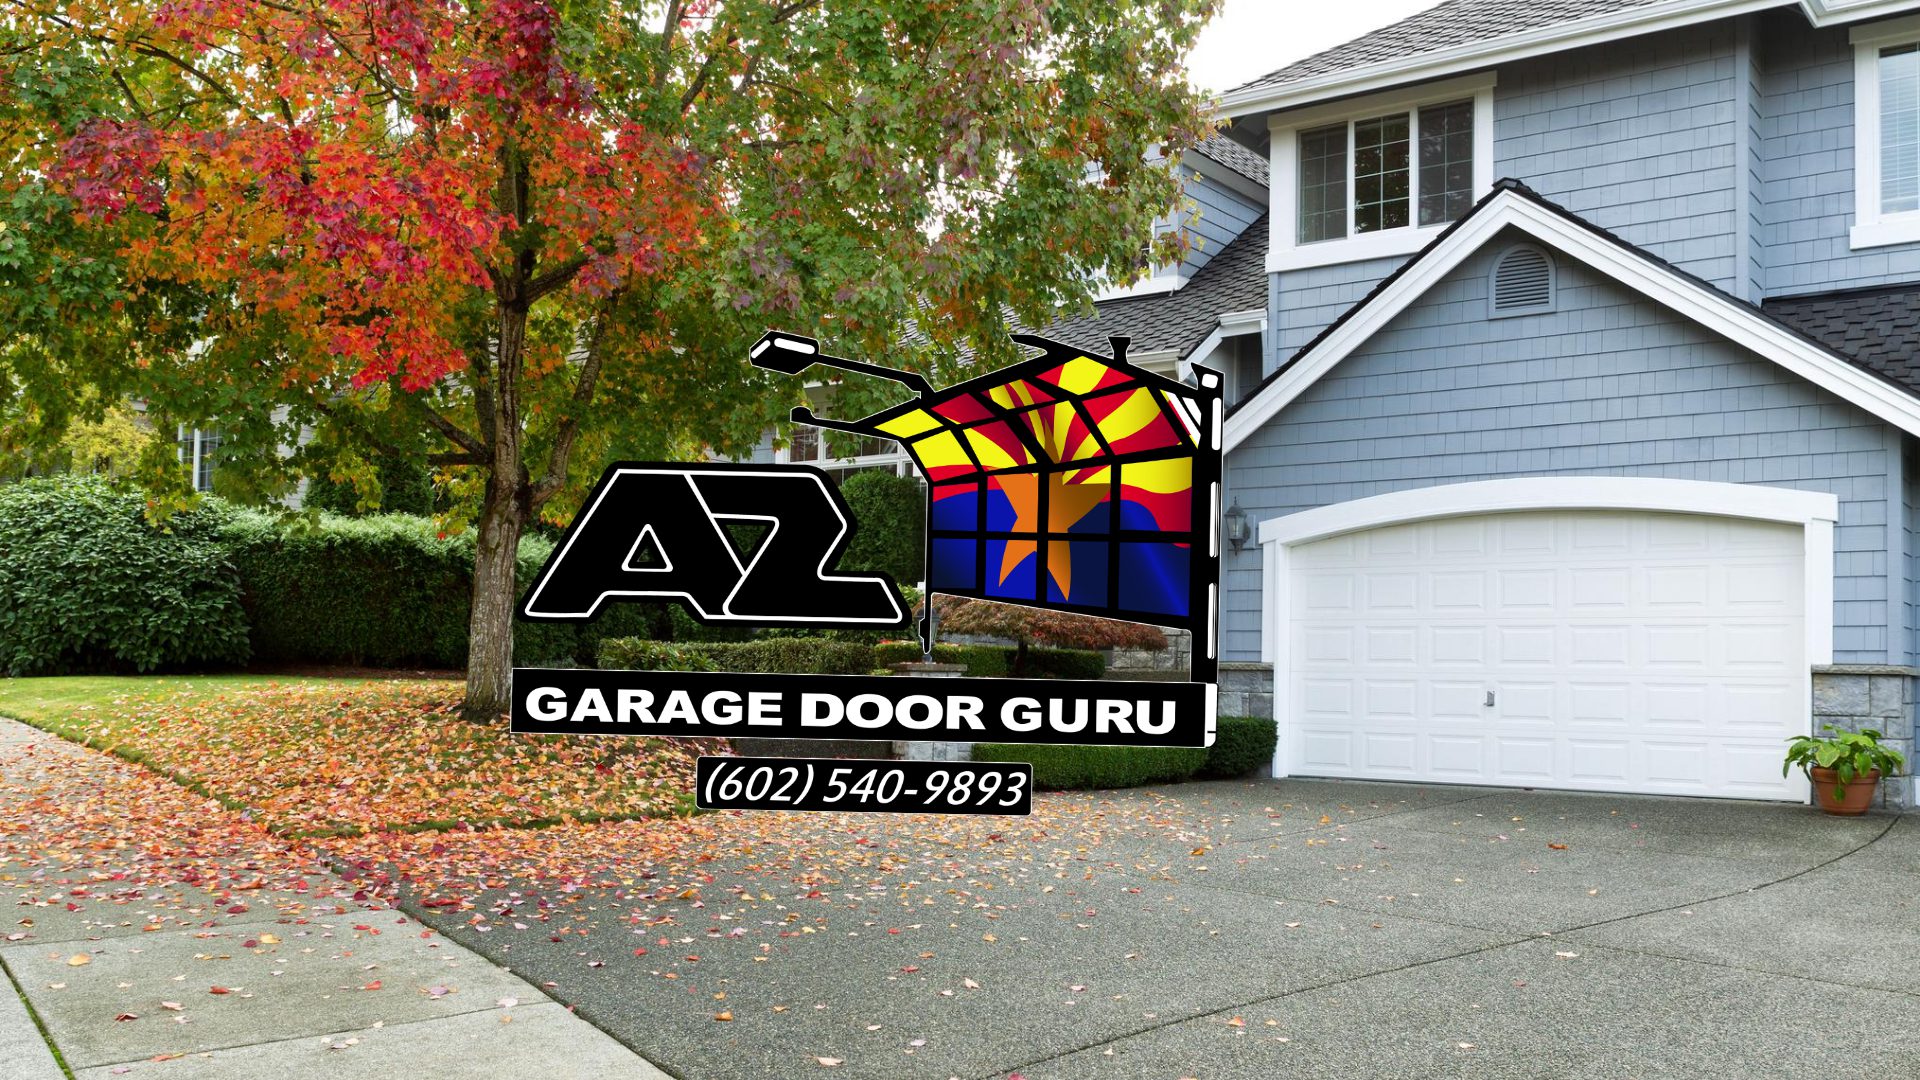 Some Things to Consider When Choosing a New Garage Door